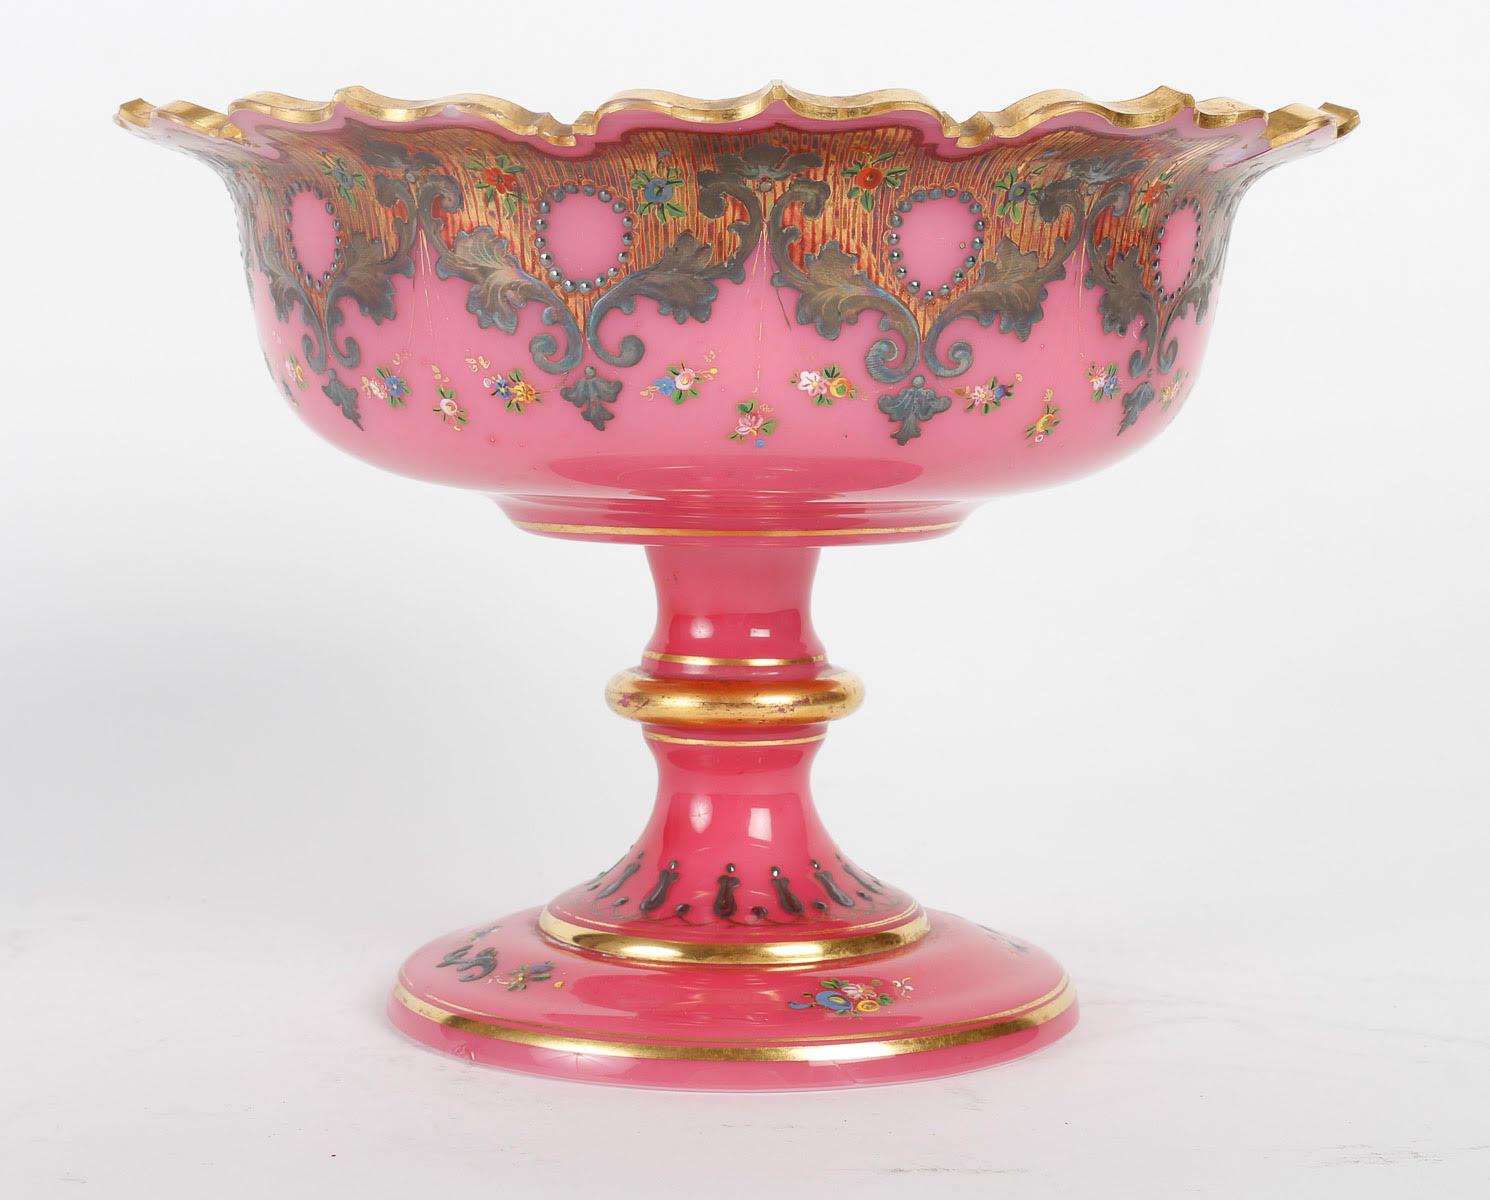 White and pink opaline service enamelled with silver and gold, 19th century.

White and pink opaline coffee or tea service enamelled with silver and gold, consisting of two coffee cups, a fruit bowl and a milk jug, 19th century, Napoleon III